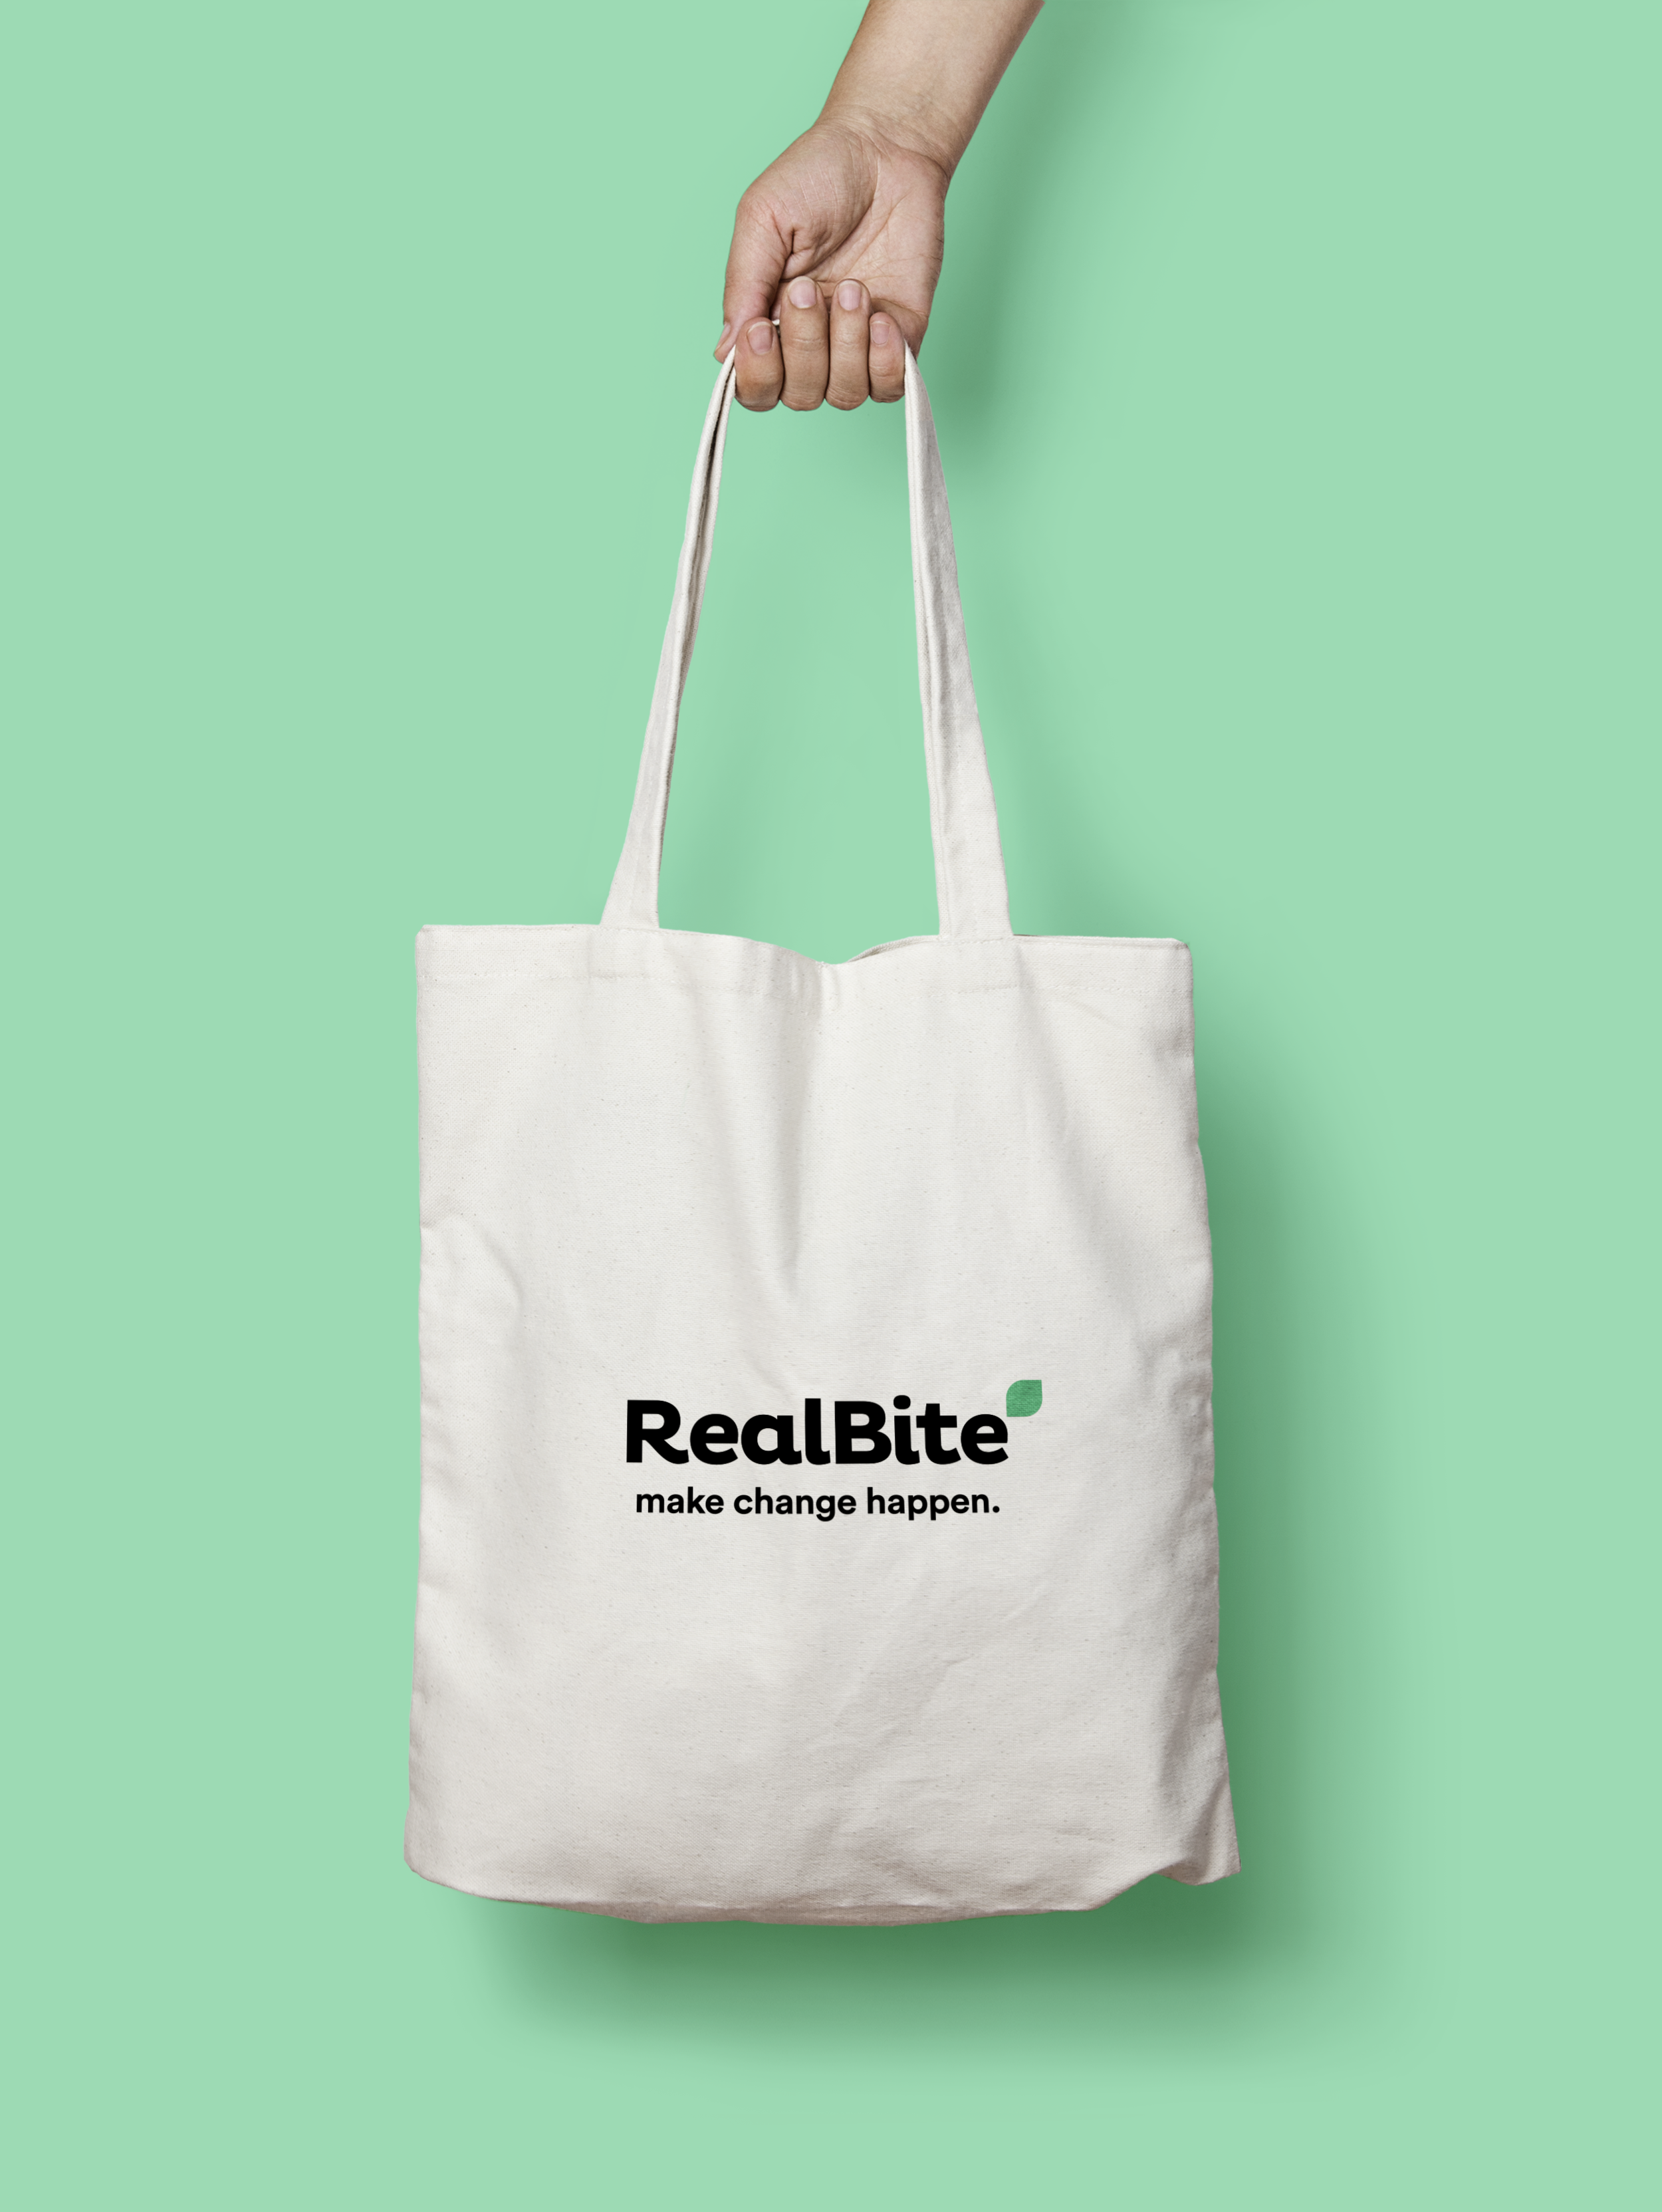 Packaging Designer London - A hand holding a white RealBite branded tote bag